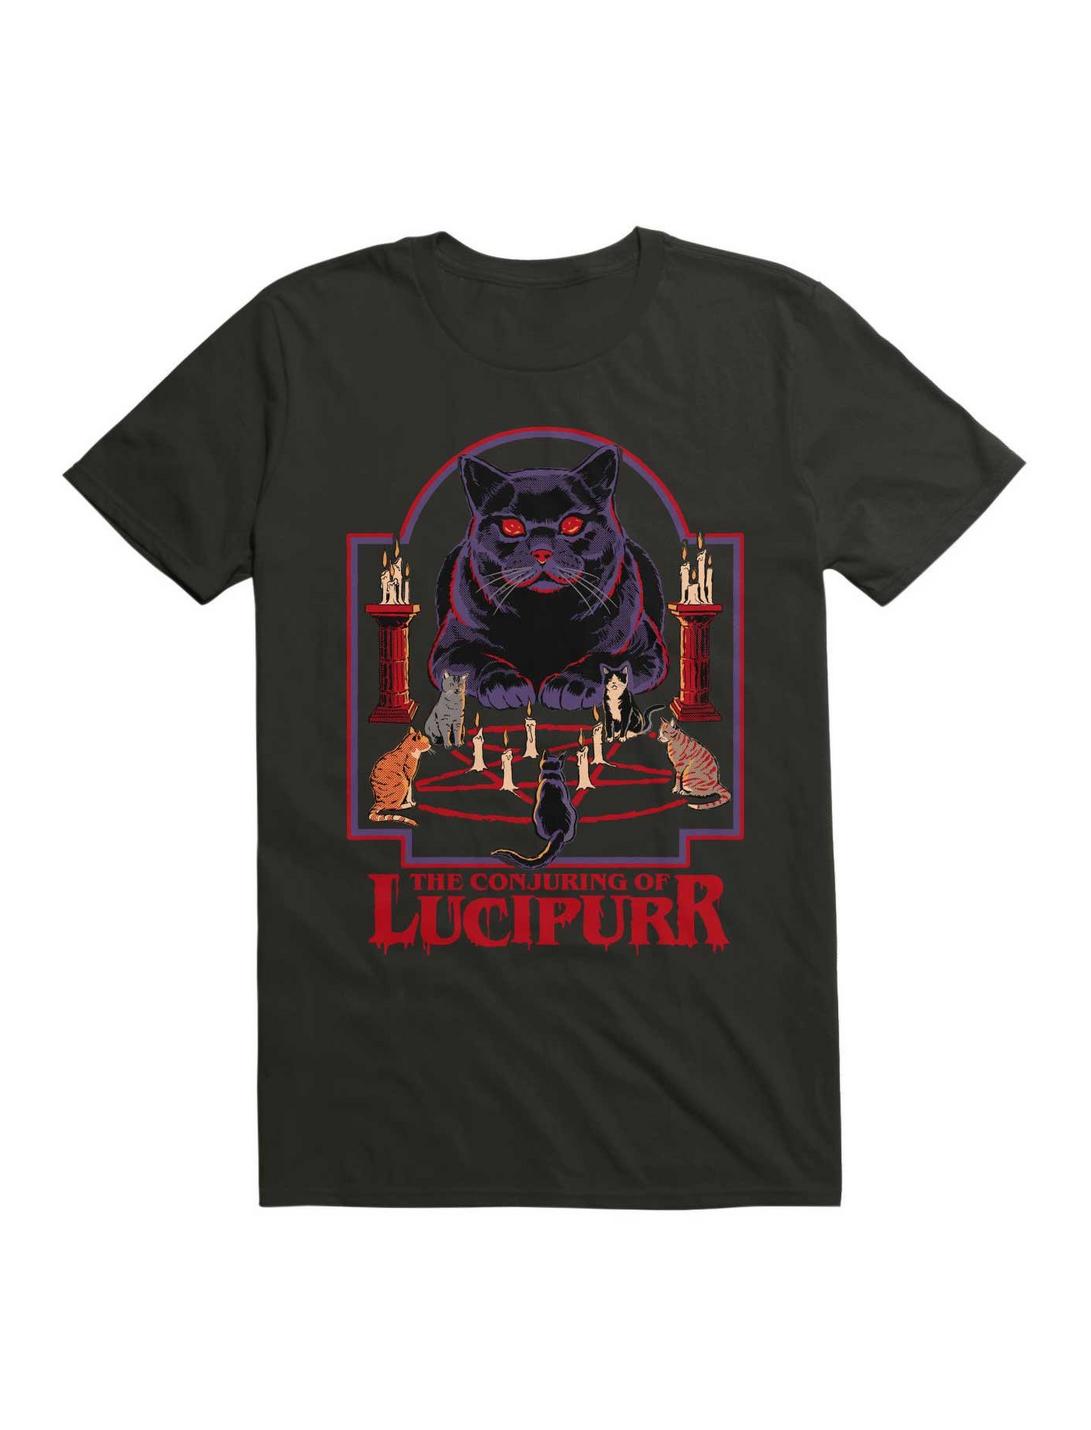 The Conjuring of Lucipurr T-Shirt By Steven Rhodes, BLACK, hi-res